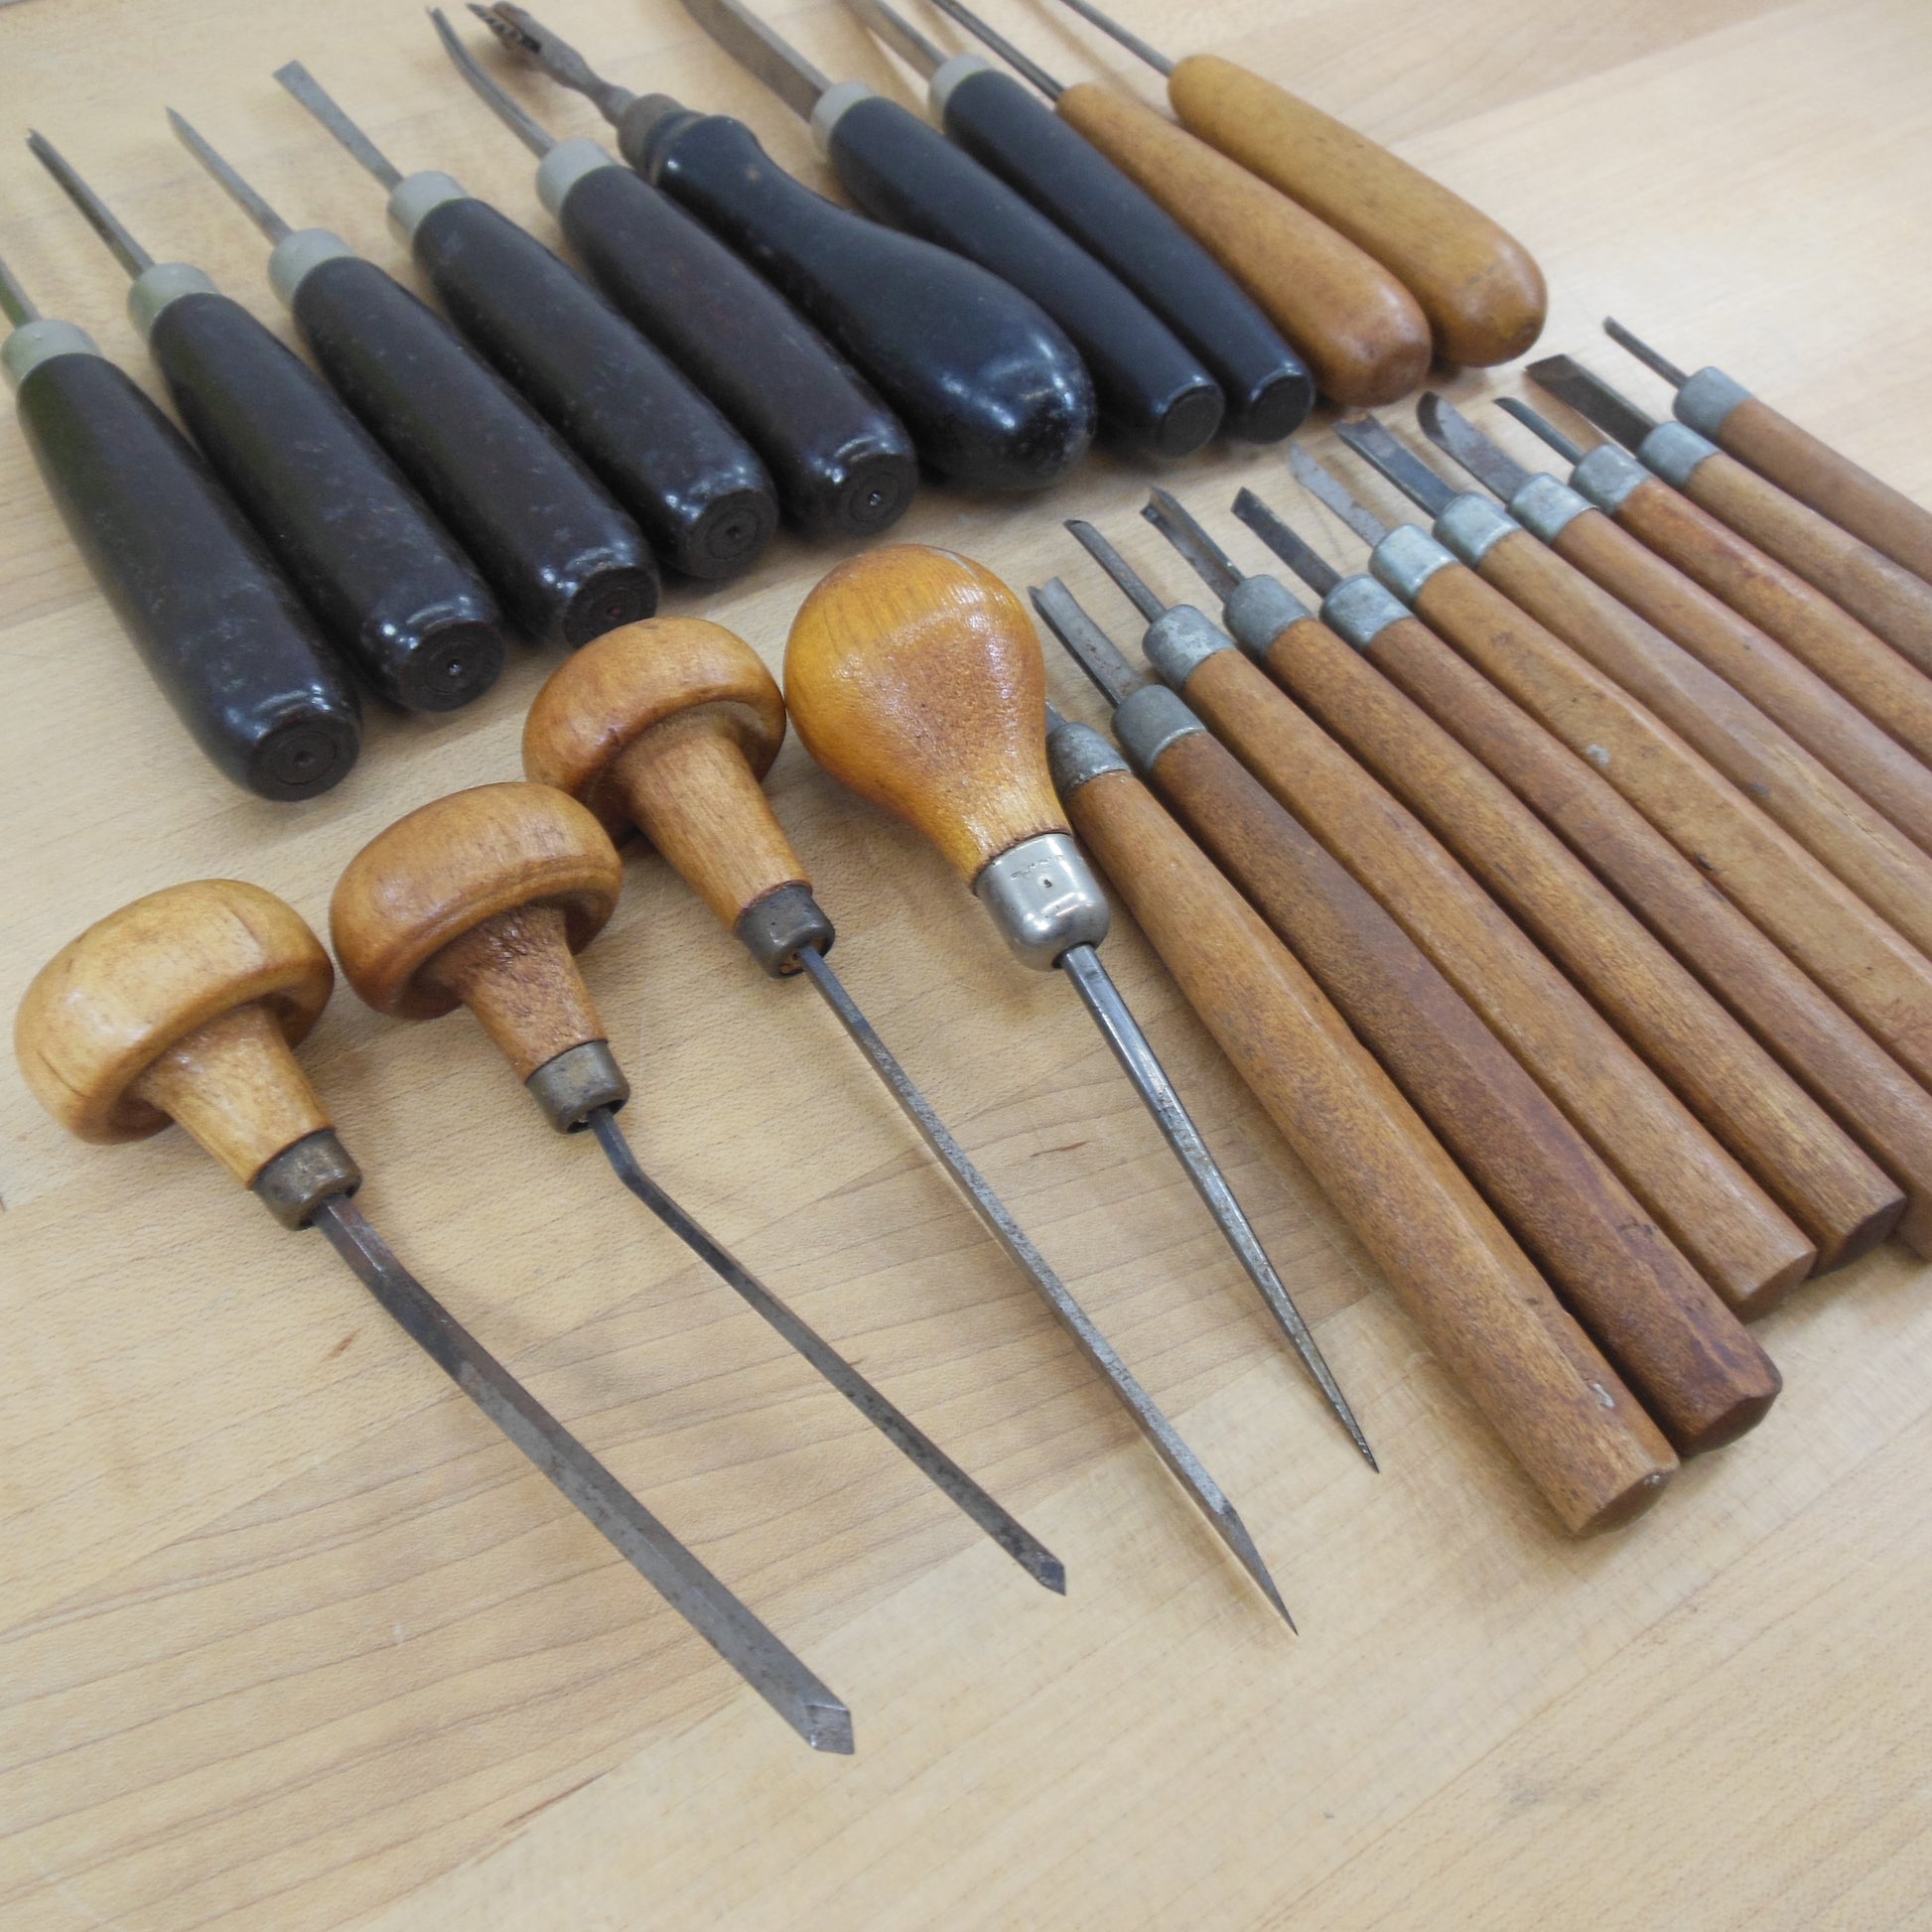 Estate 26 Lot Small Carving Tools Gouge Chisel - Muller Brookstone Mittermeier Used